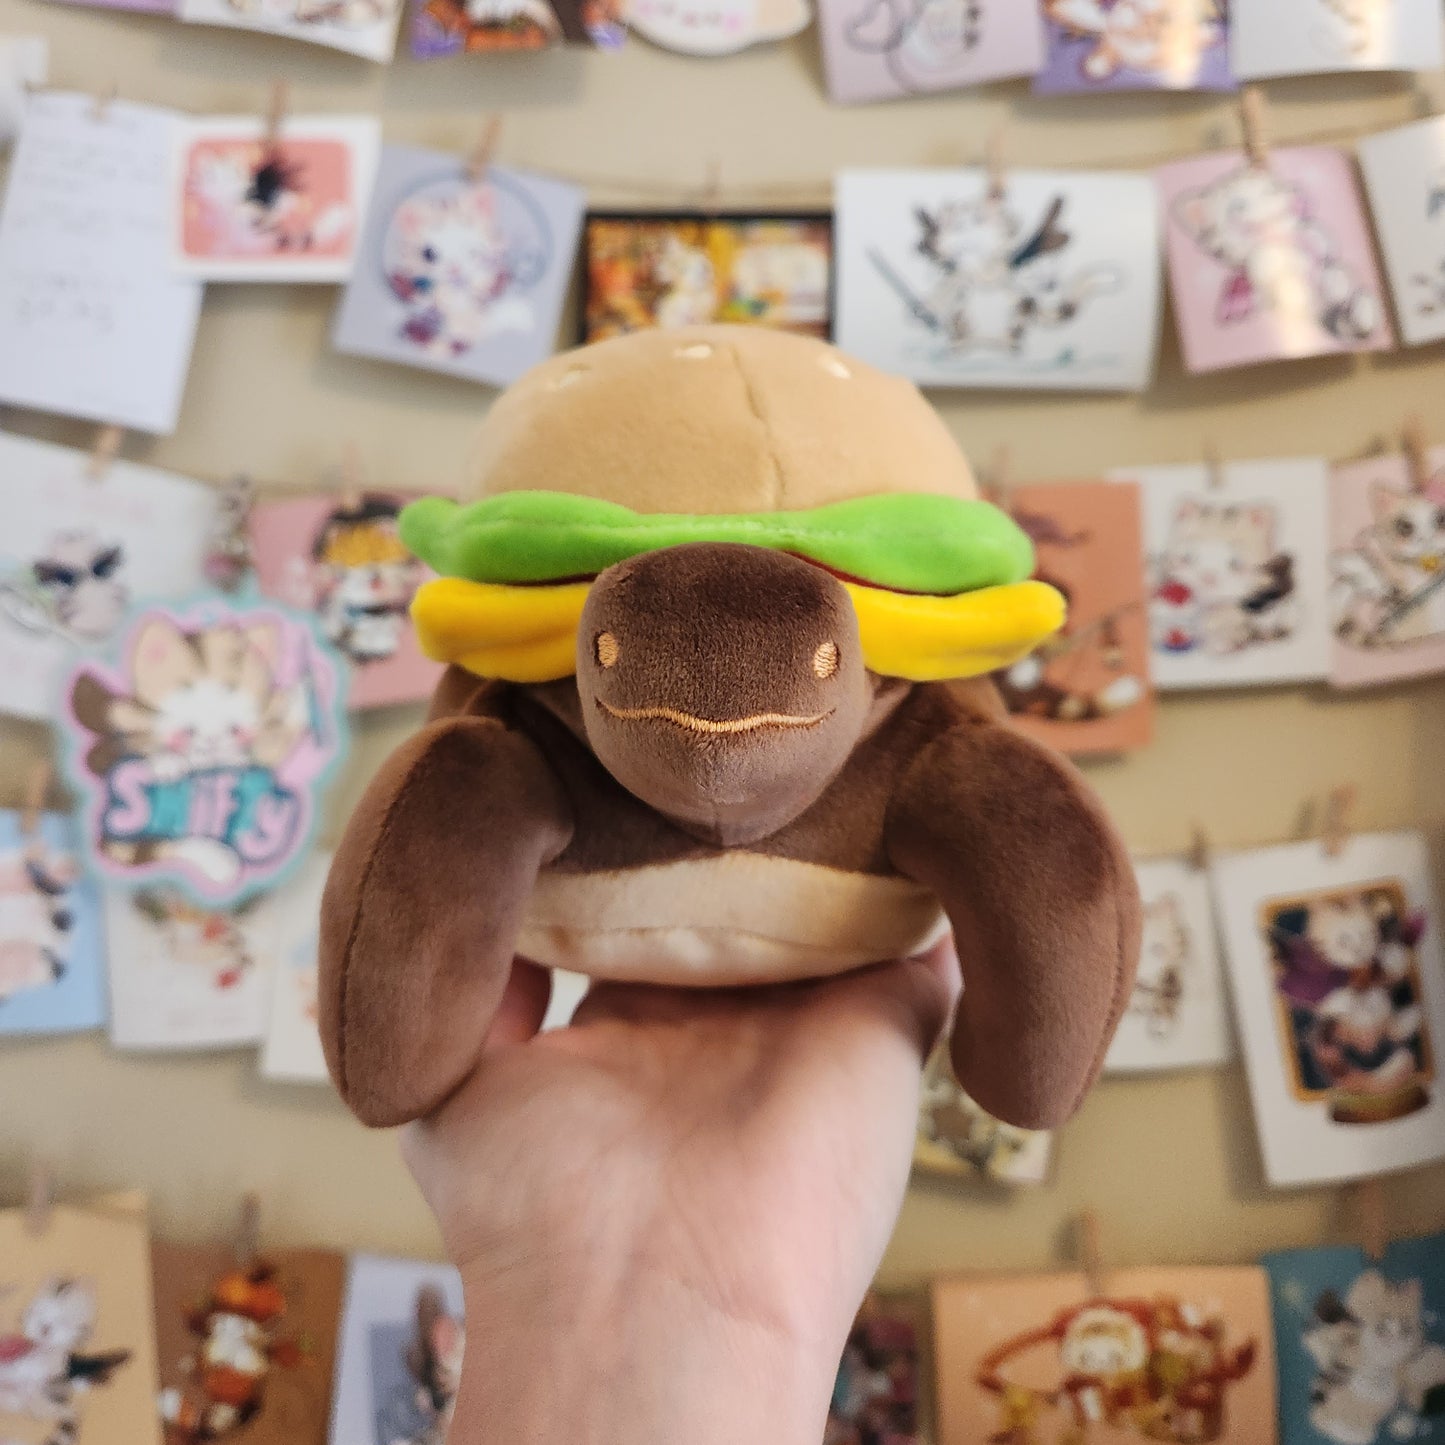 SEWING PATTERN - 5" Burger Turtle and Macaron Variant